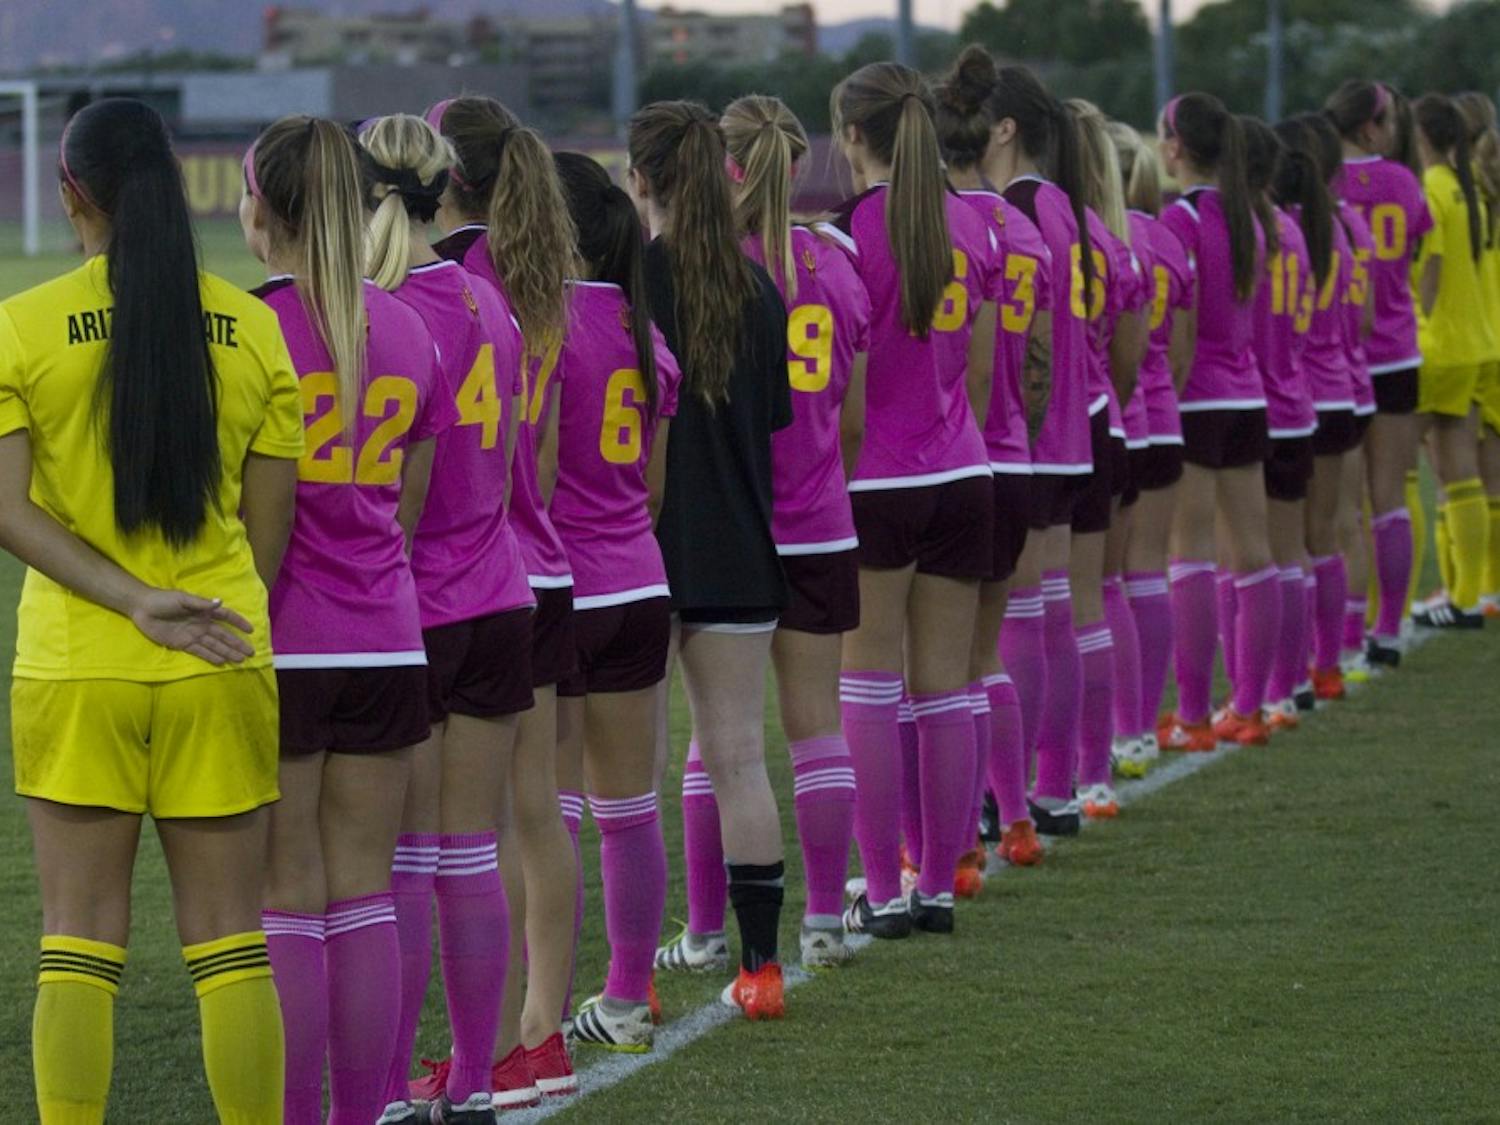 The ASU women's soccer team stands for the national anthem before a 2-0 loss to the USC Trojans in Sun Devil Soccer Stadium in Tempe, Arizona, on Saturday, Oct. 15, 2016.